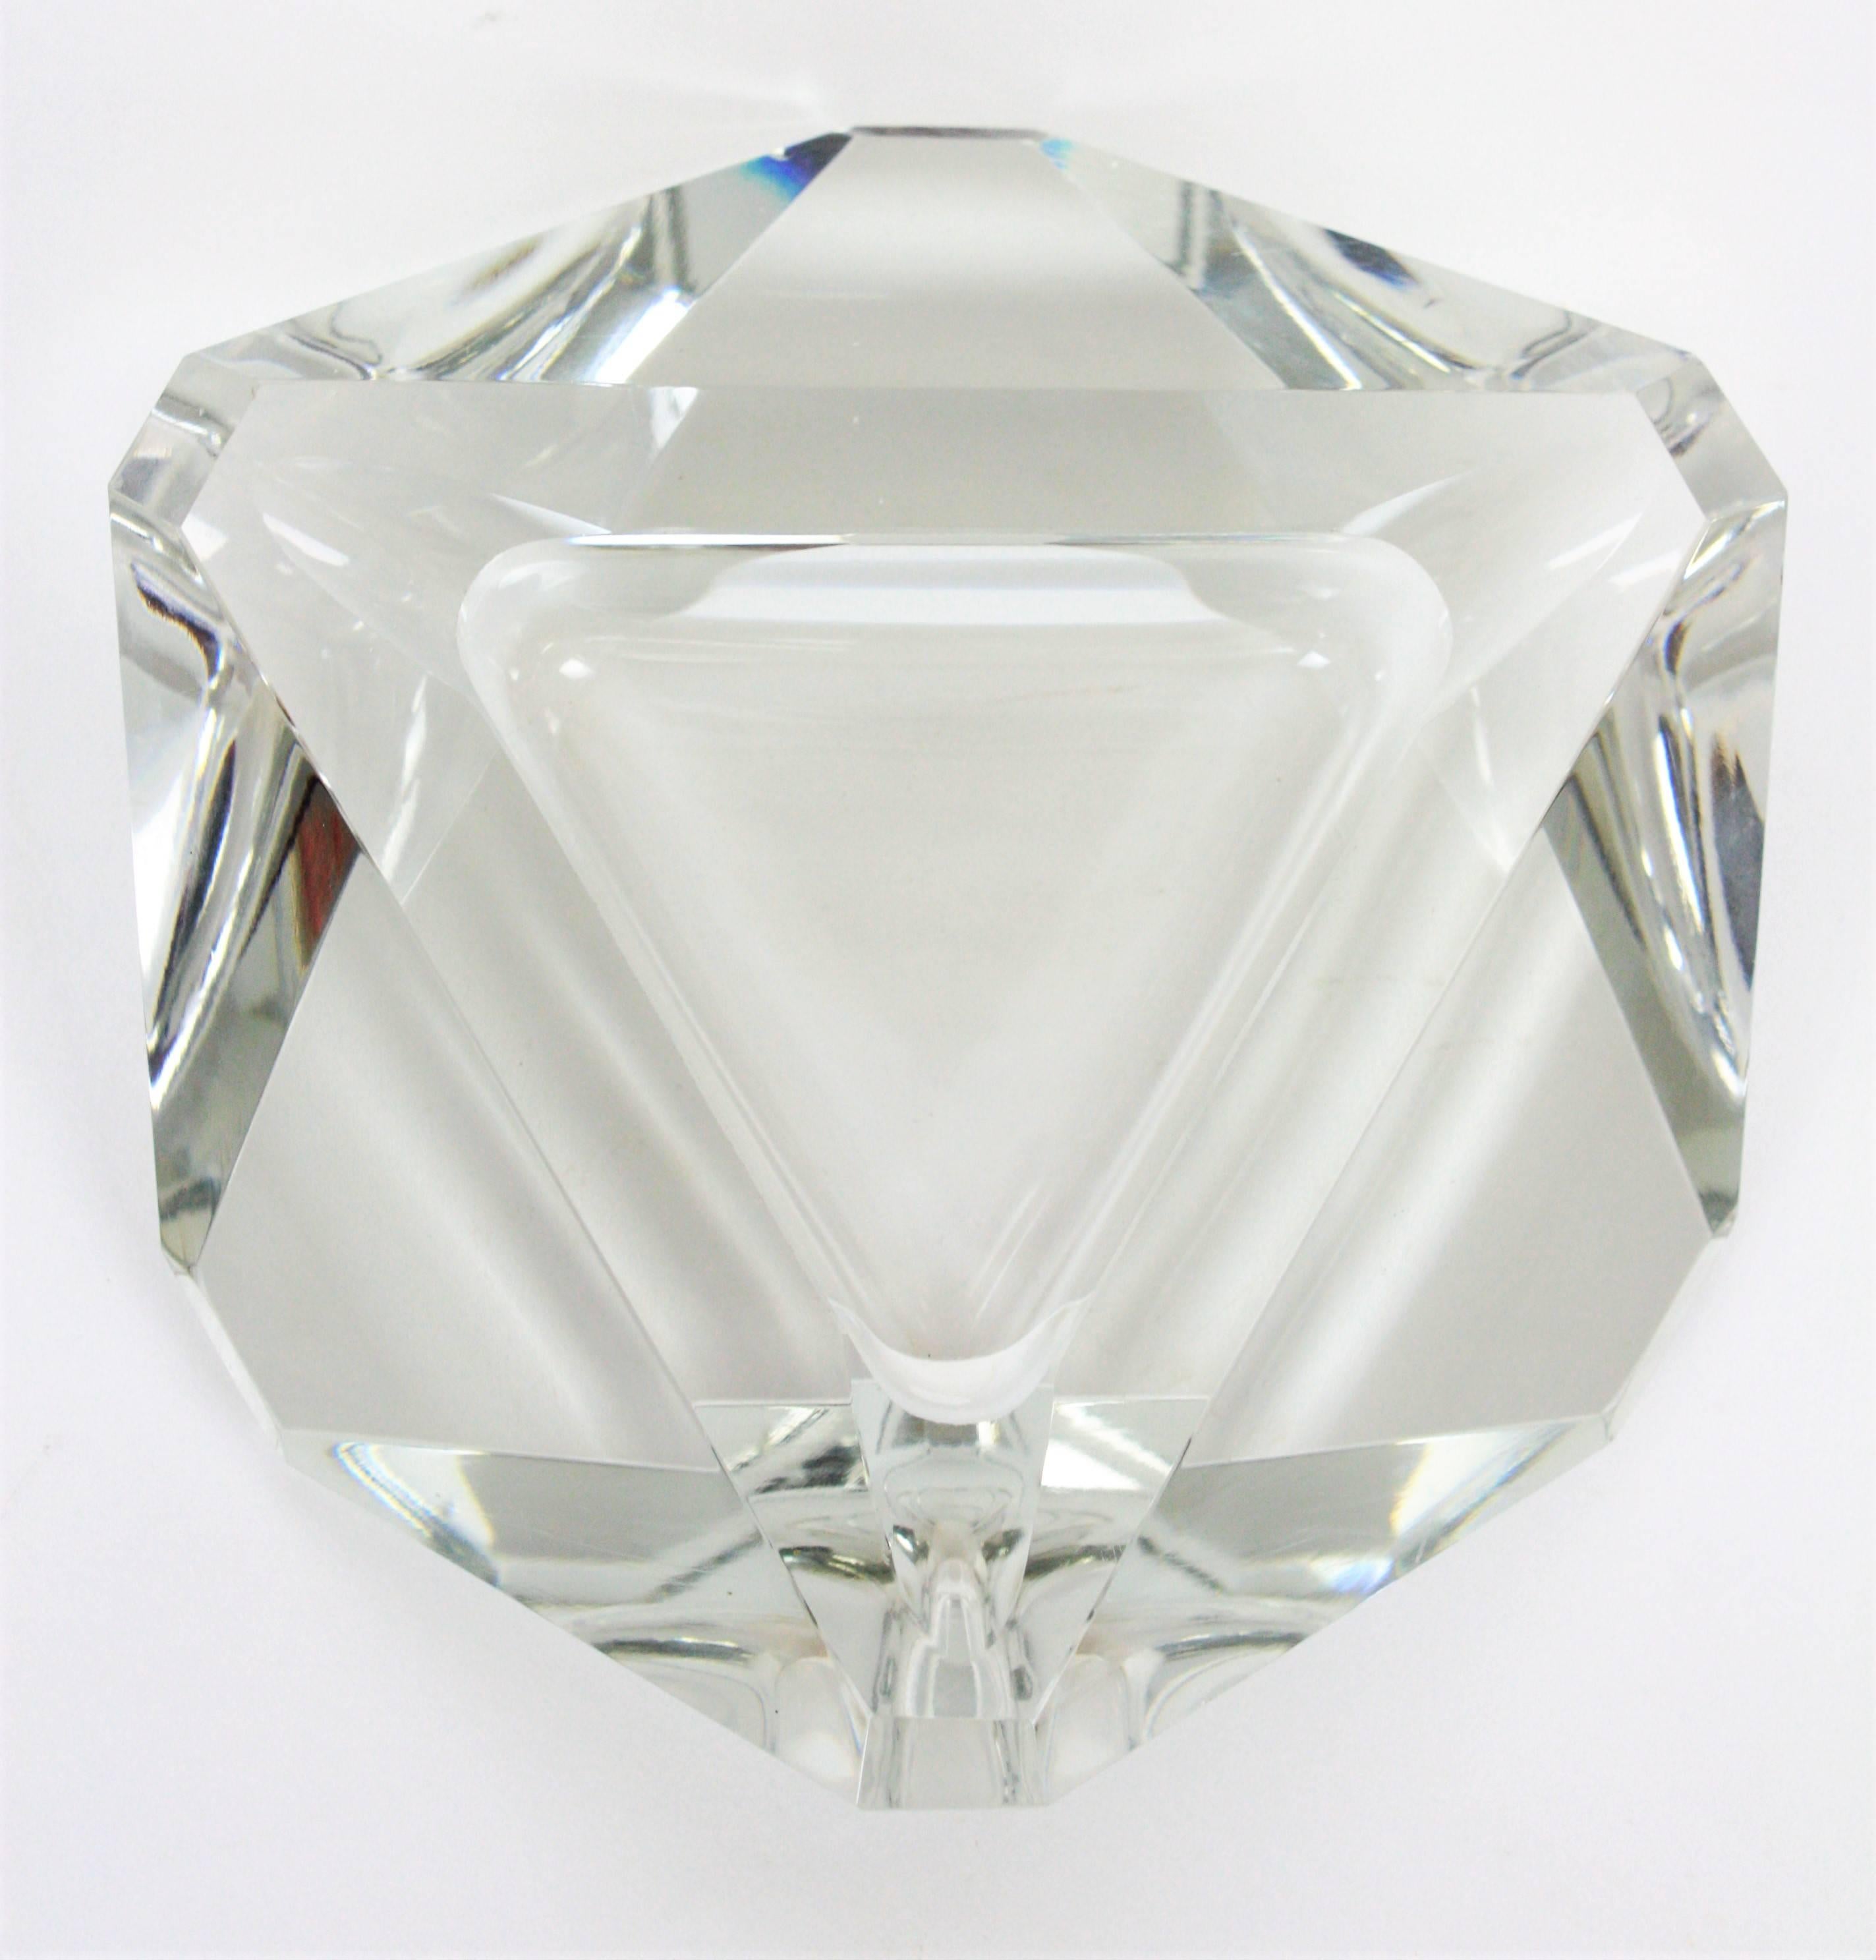 A highly decorative faceted crystal triangular shaped ashtray from the Art Deco period. Attributed to Baccarat. Extra thick crystal clear faceted glass and large size. Excellent condition. Useful as ashtray, vide poche or paperweight.
France,